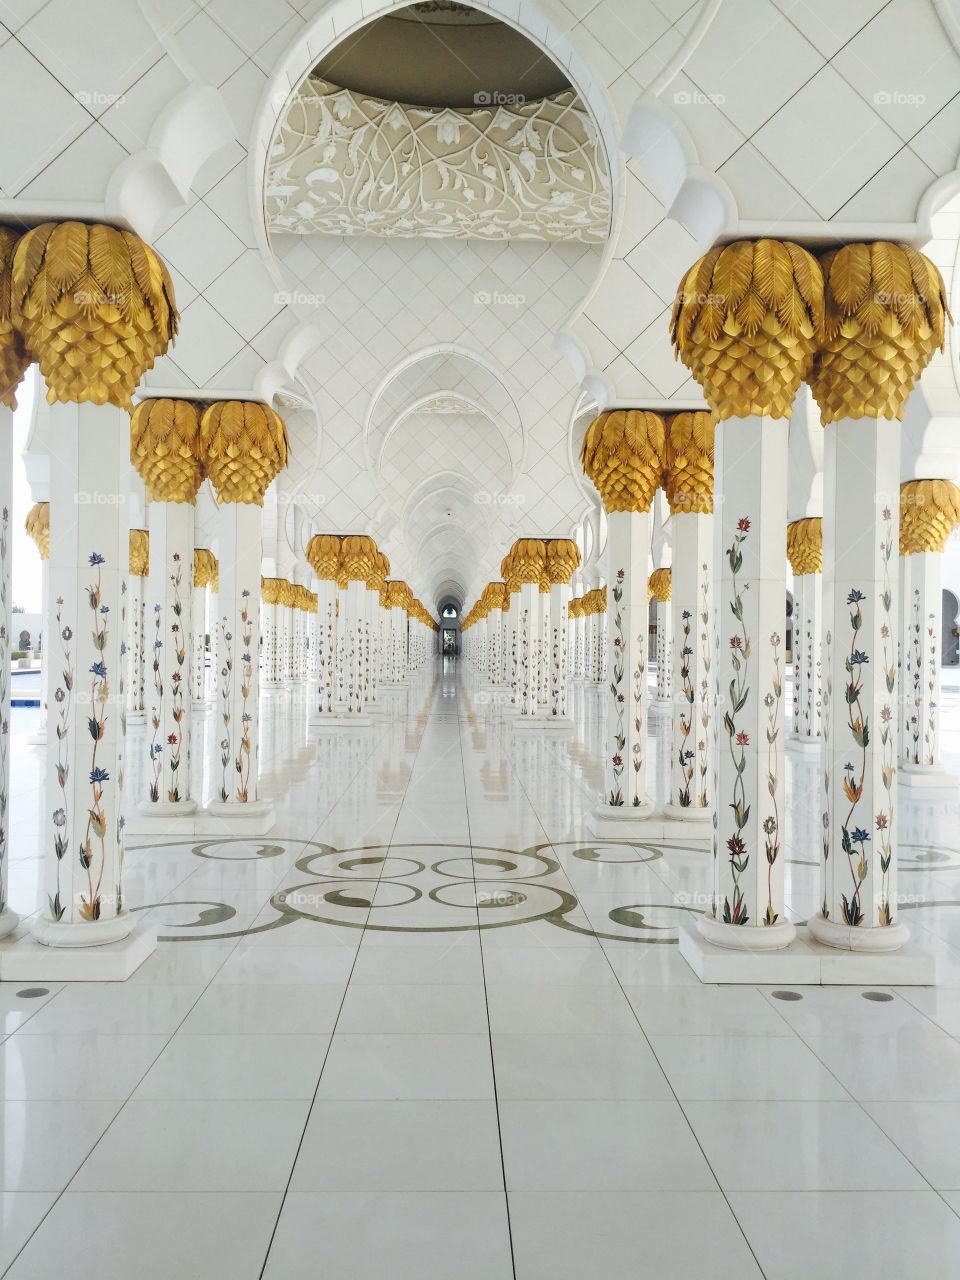 Mosque interior. Perspective view of mosque in Abu Dhabi UAE 